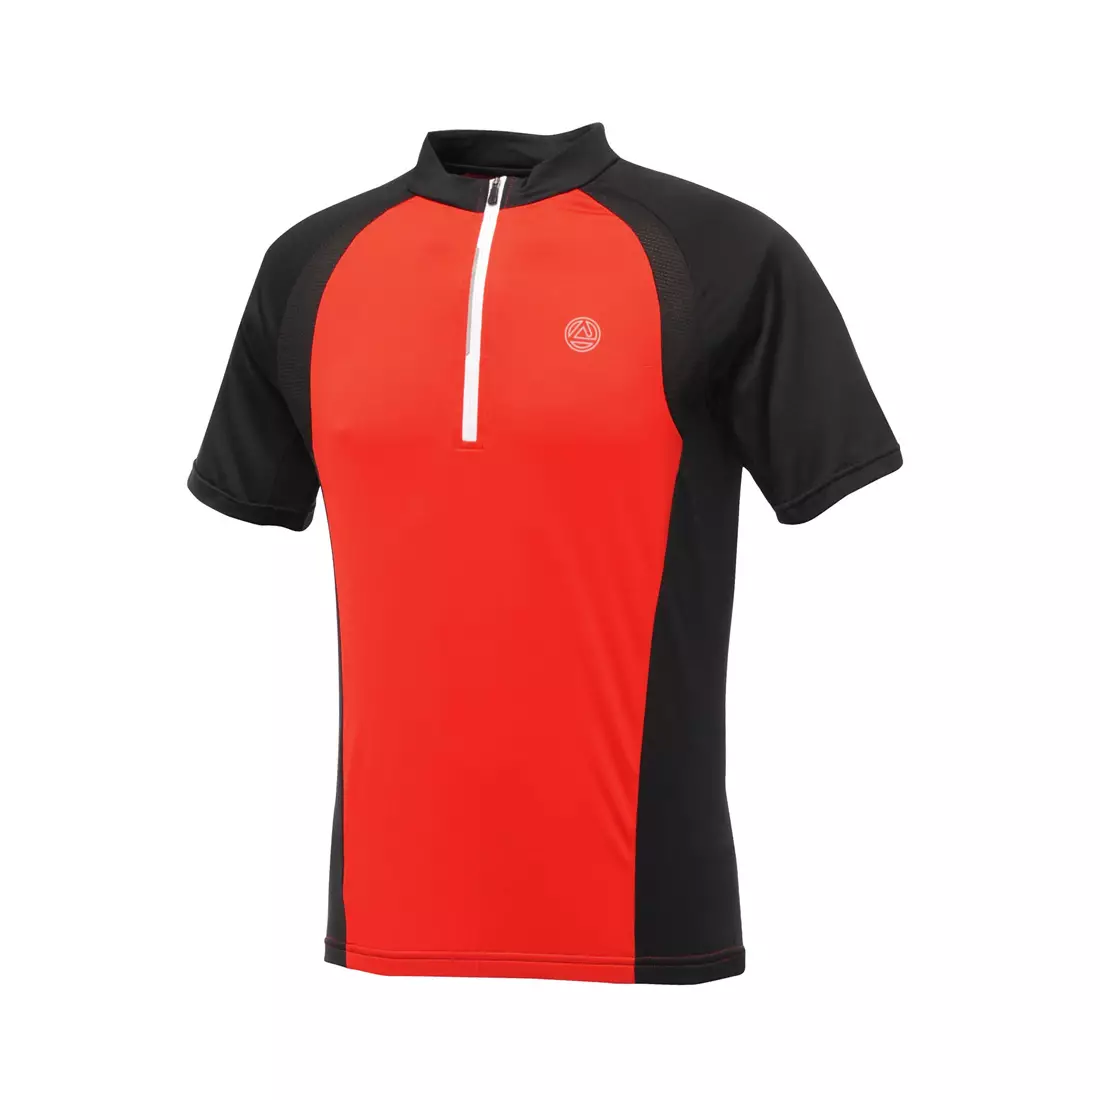 DARE2B MAGNETIZE - men's cycling jersey, DMT109-657